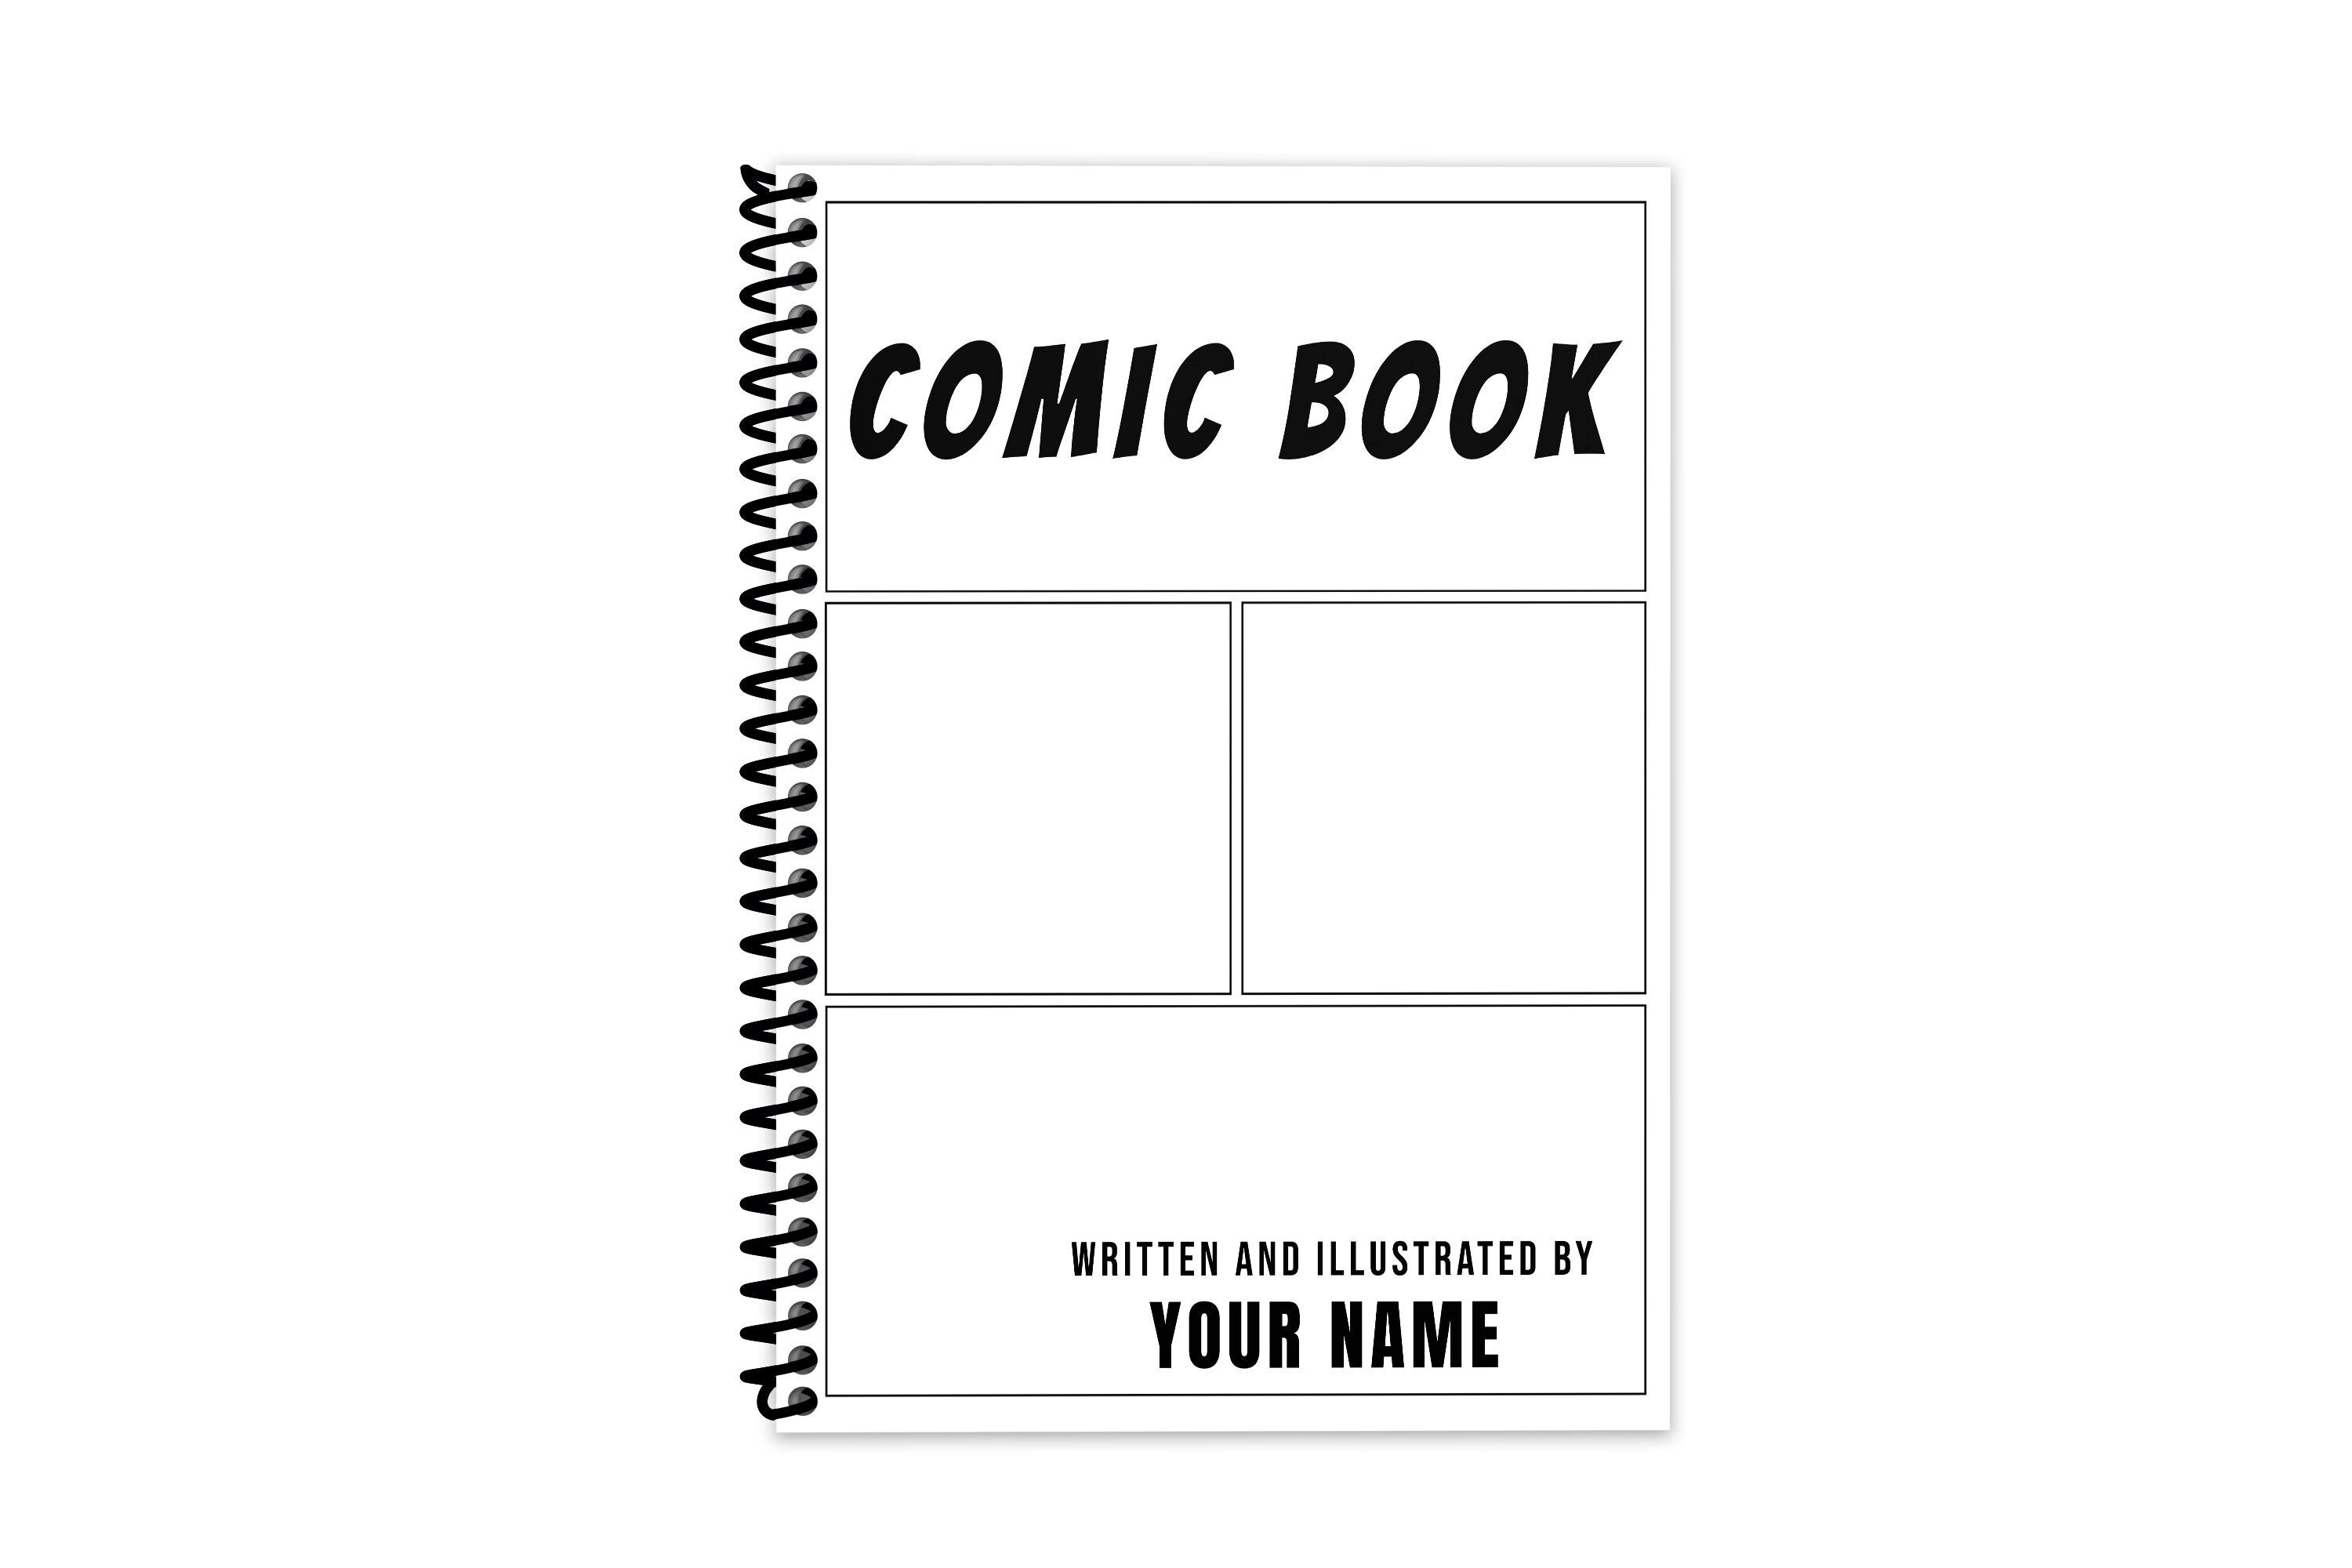 Blank Comic Book for Kids: Super Hero Notebook (Spiral Edition